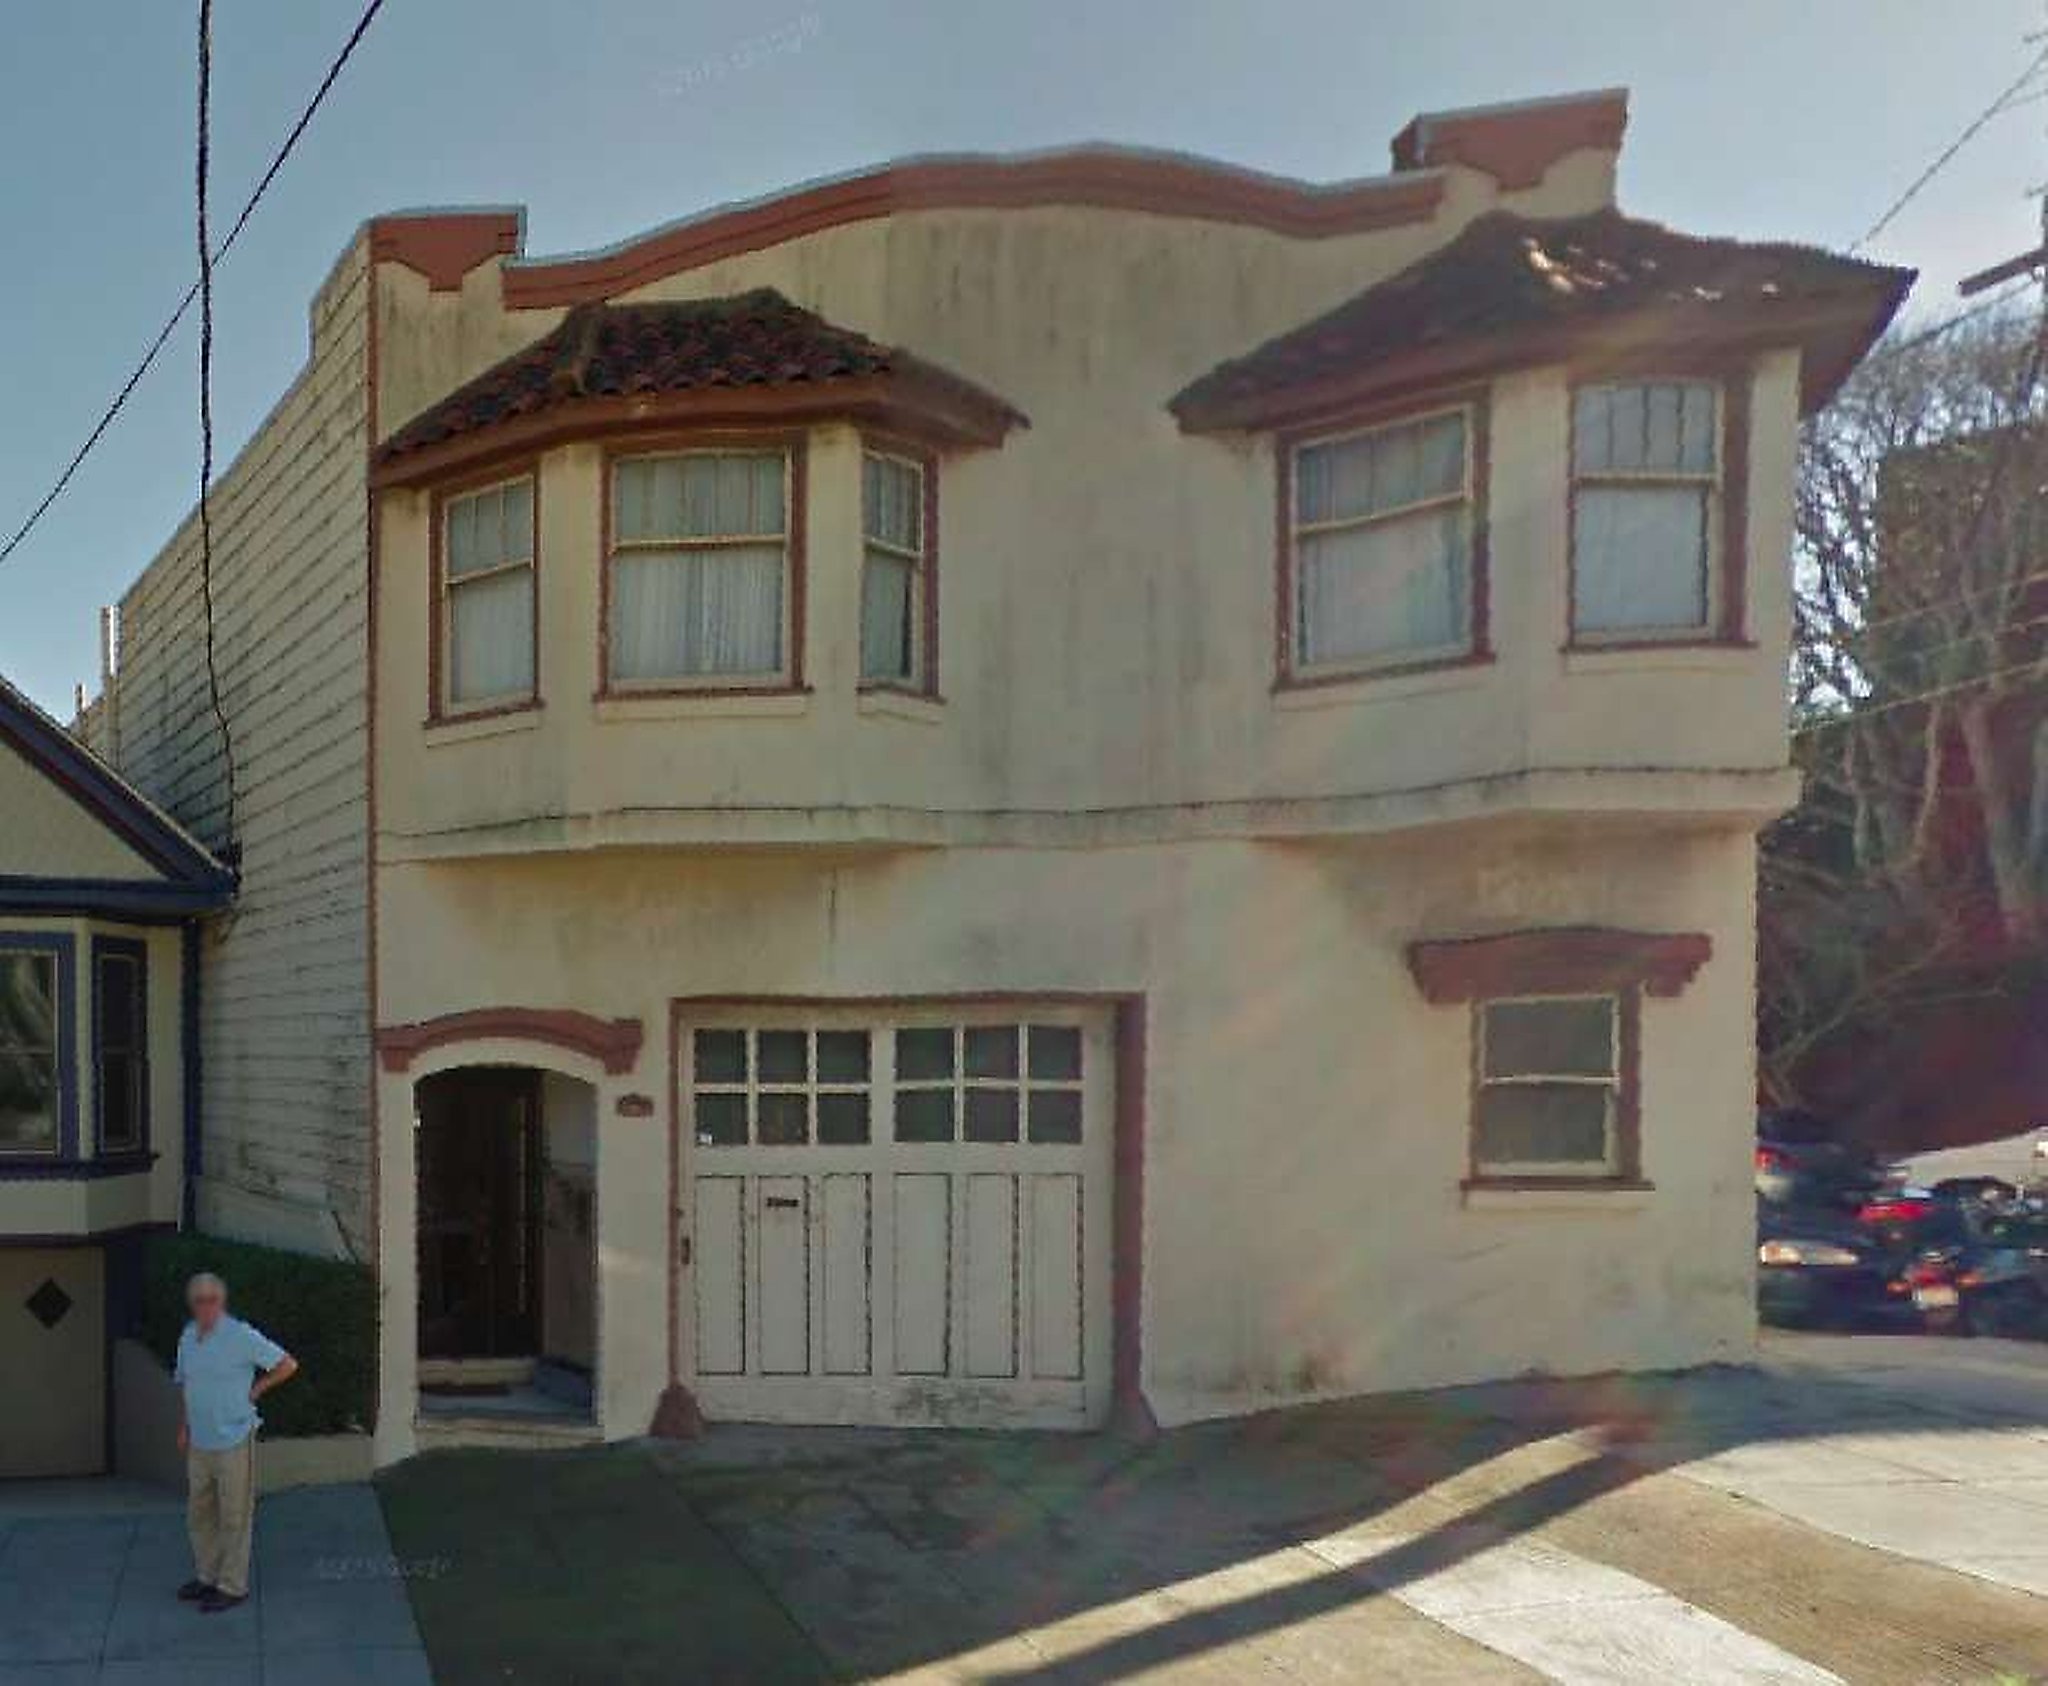 $400K settlement bonanza for Bernal tenant 'evicted by rent increase' - SFGate